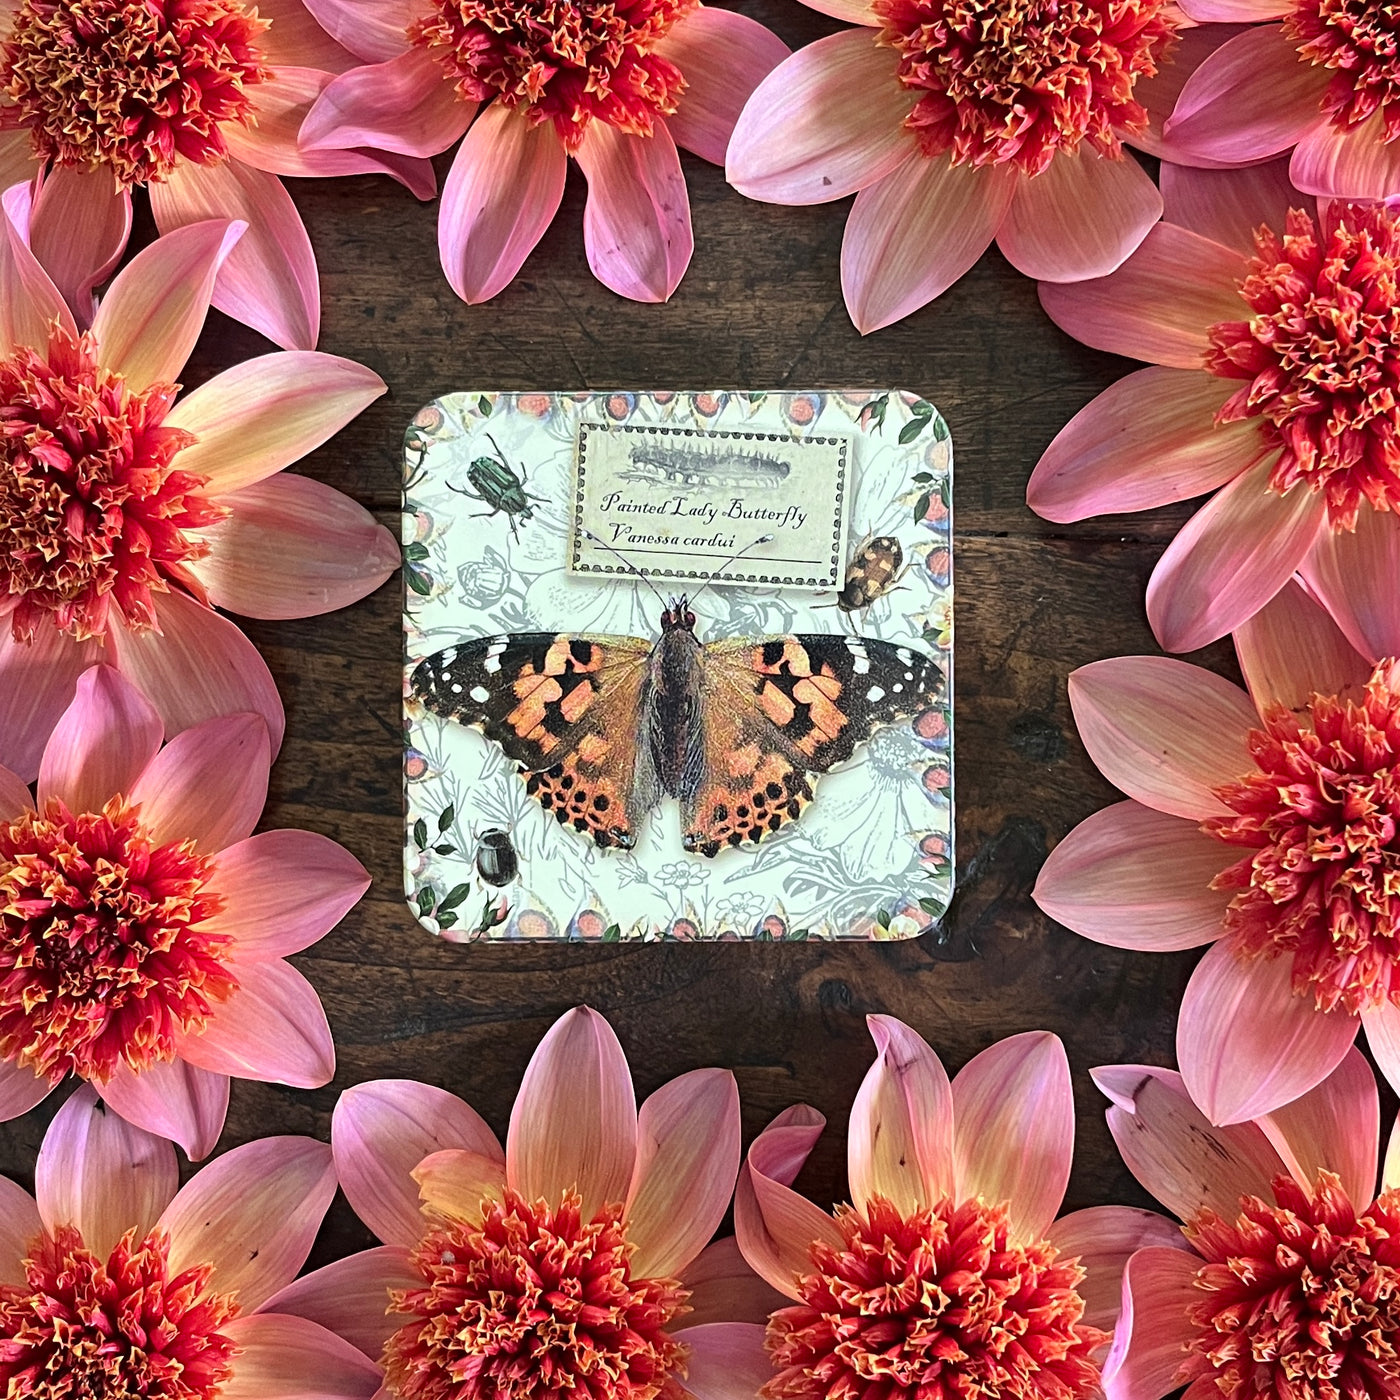 Puriri Lane | Vintage Butterfly Tin | Painted Lady Butterfly